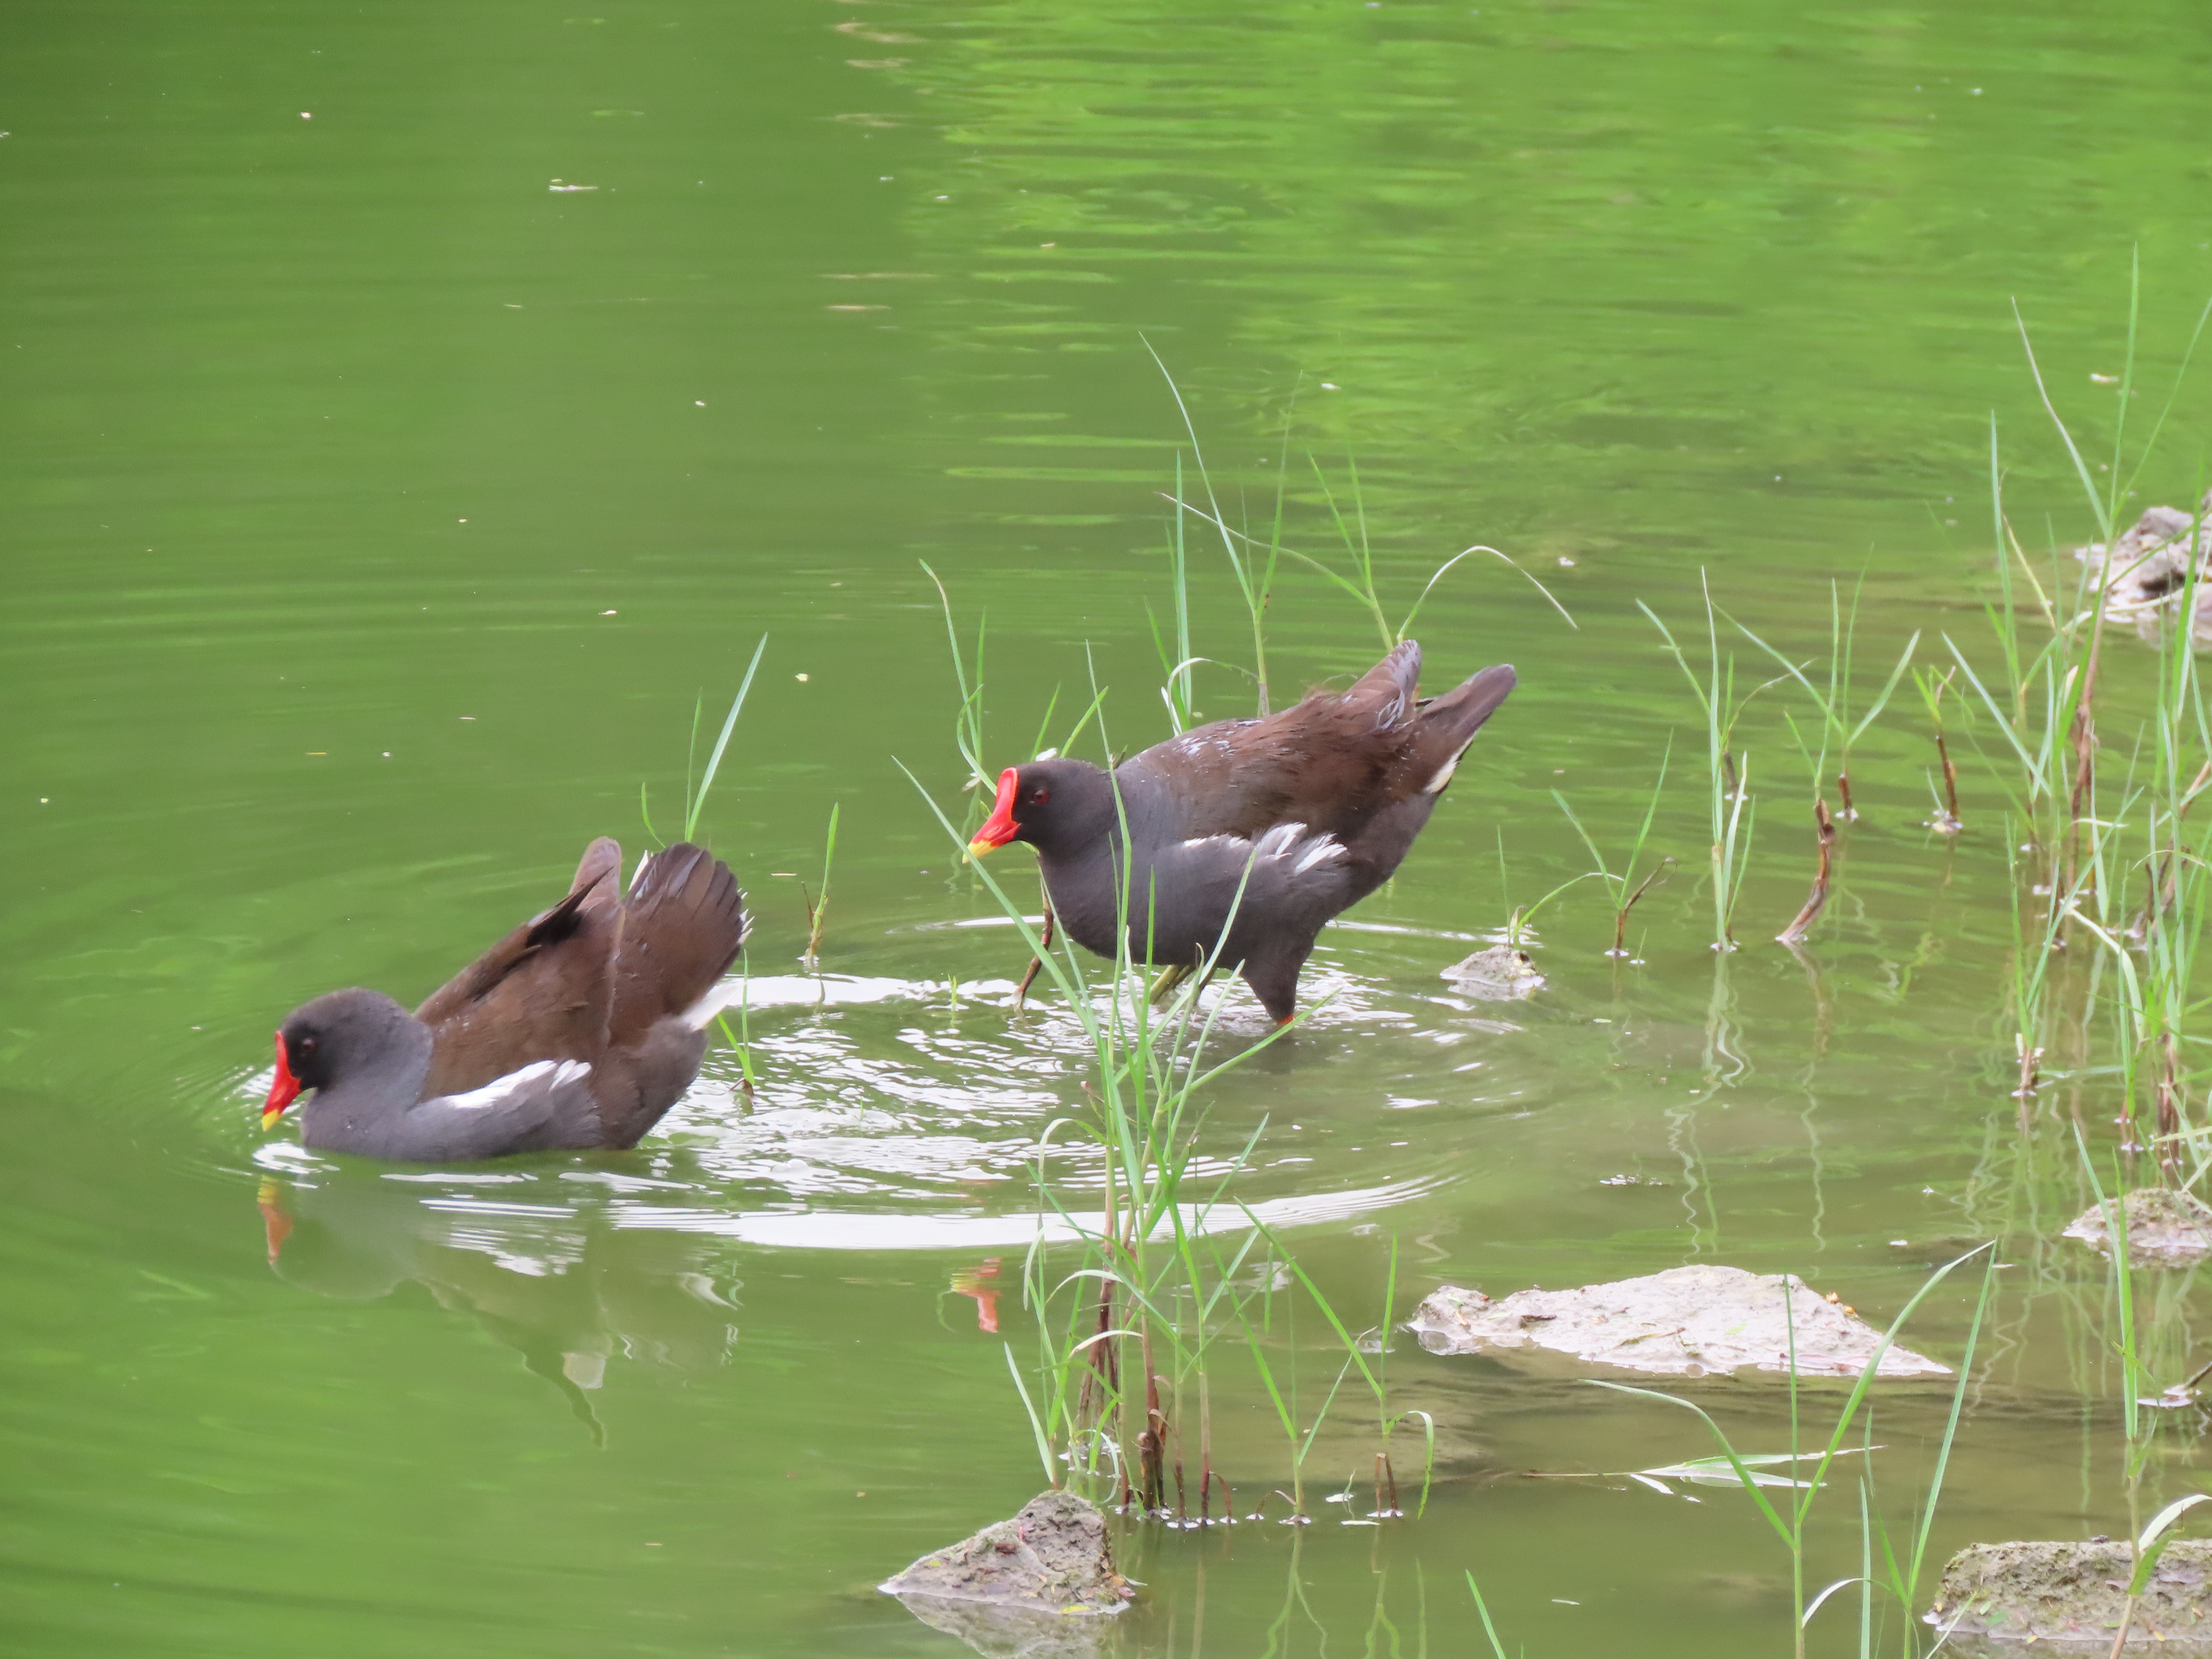 The campus romance of a common moorhen couple in Hainan